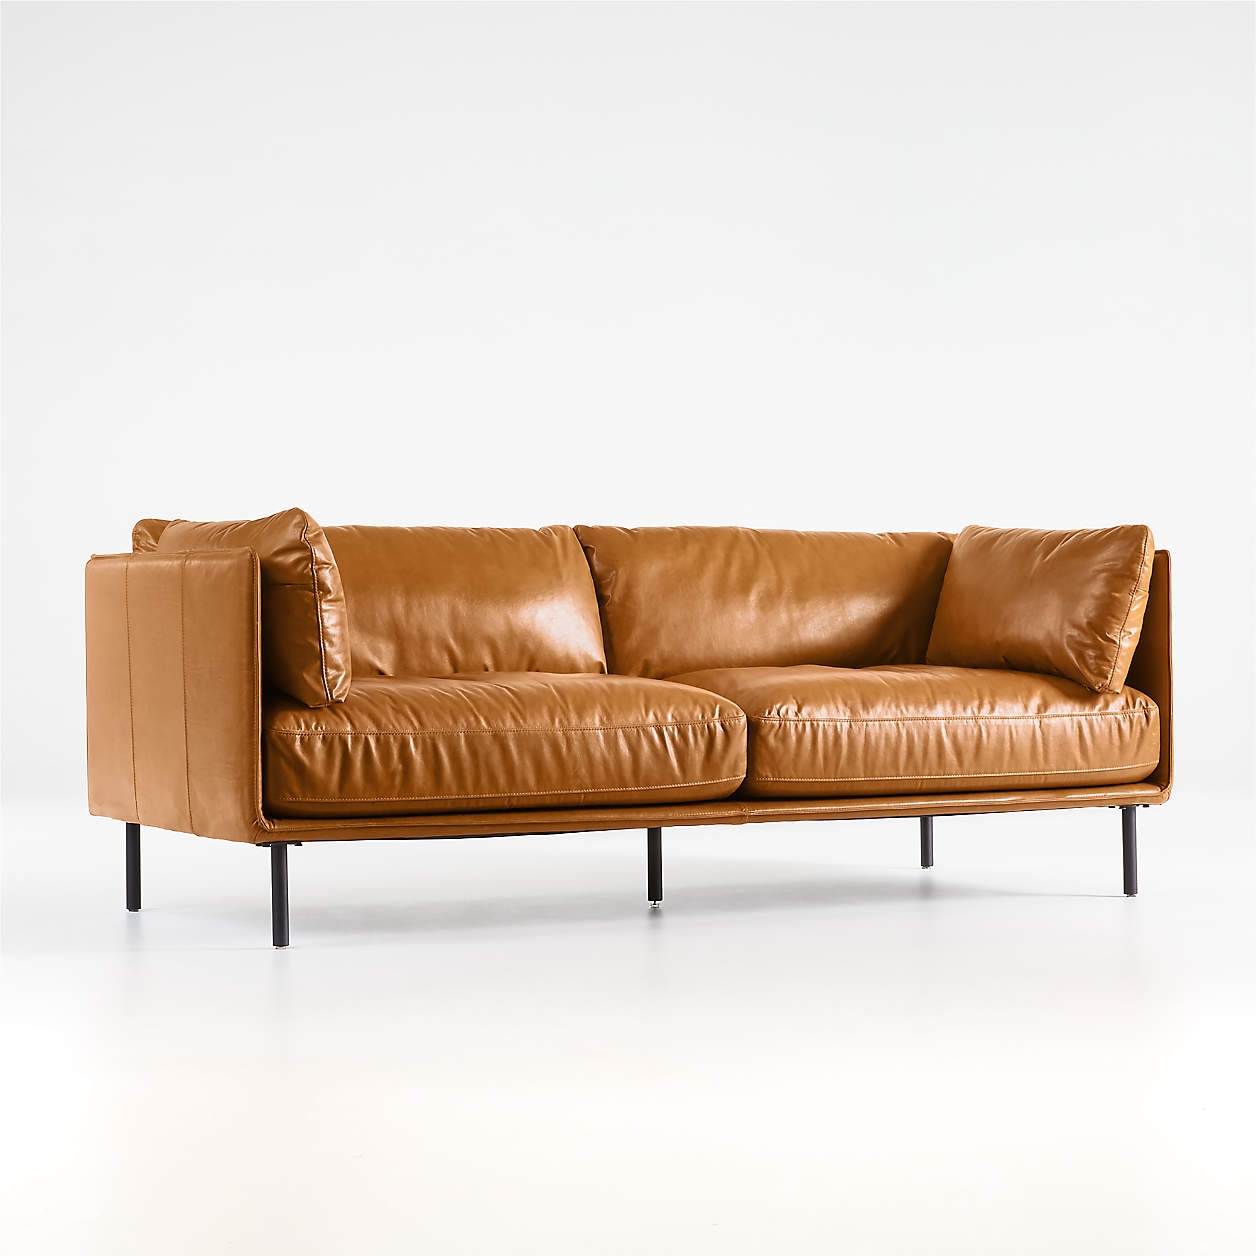 Wells Leather Sofa, Old Town Cayenne - Image 3